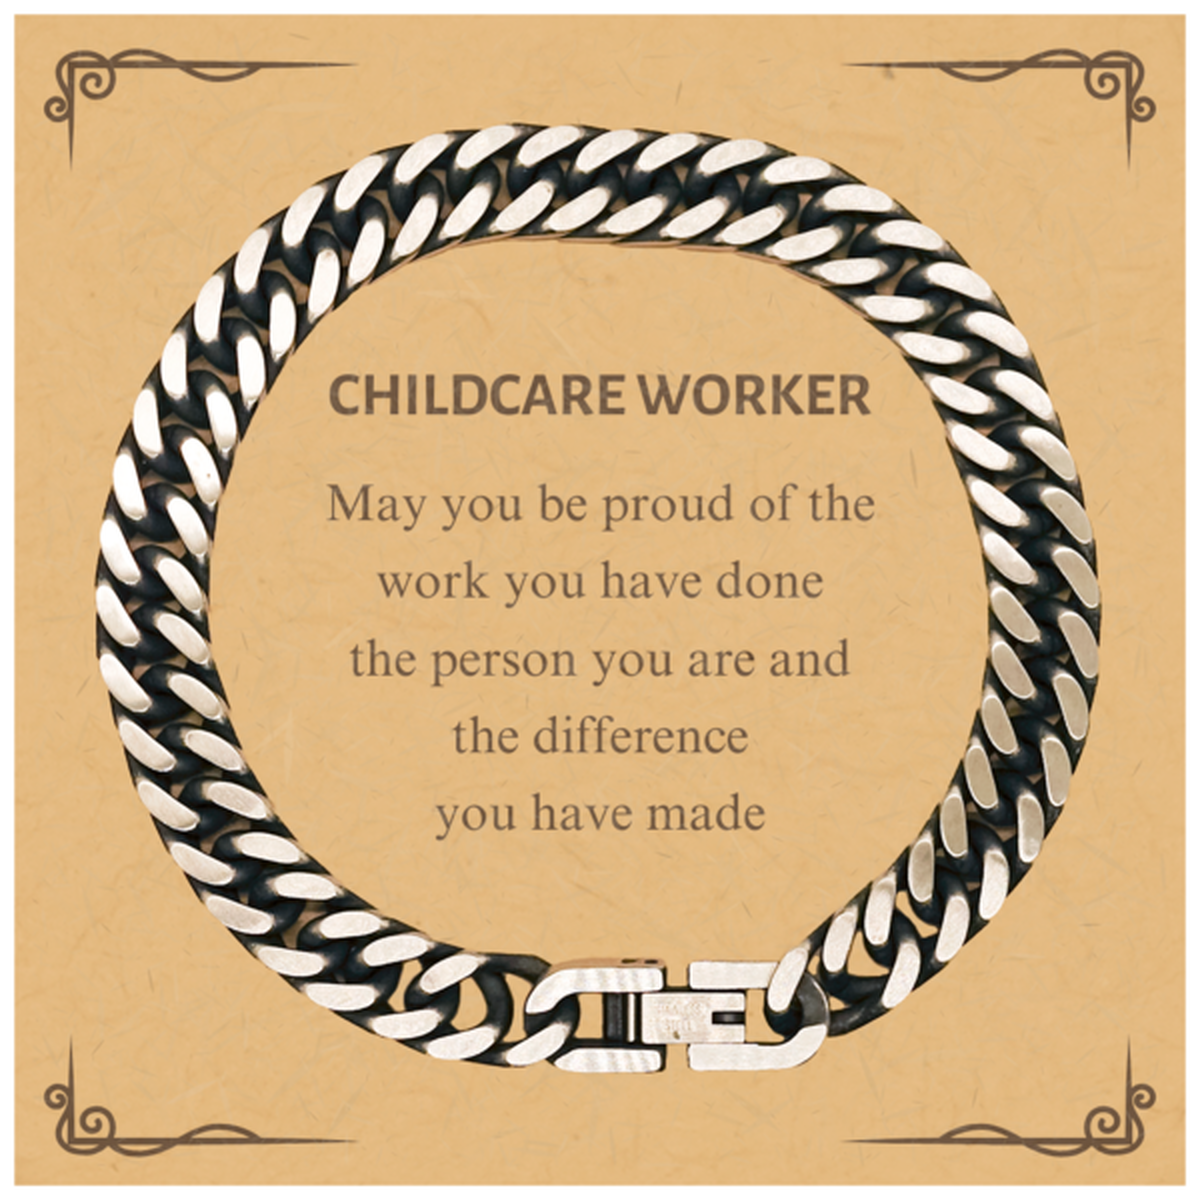 Childcare Worker May you be proud of the work you have done, Retirement Childcare Worker Cuban Link Chain Bracelet for Colleague Appreciation Gifts Amazing for Childcare Worker